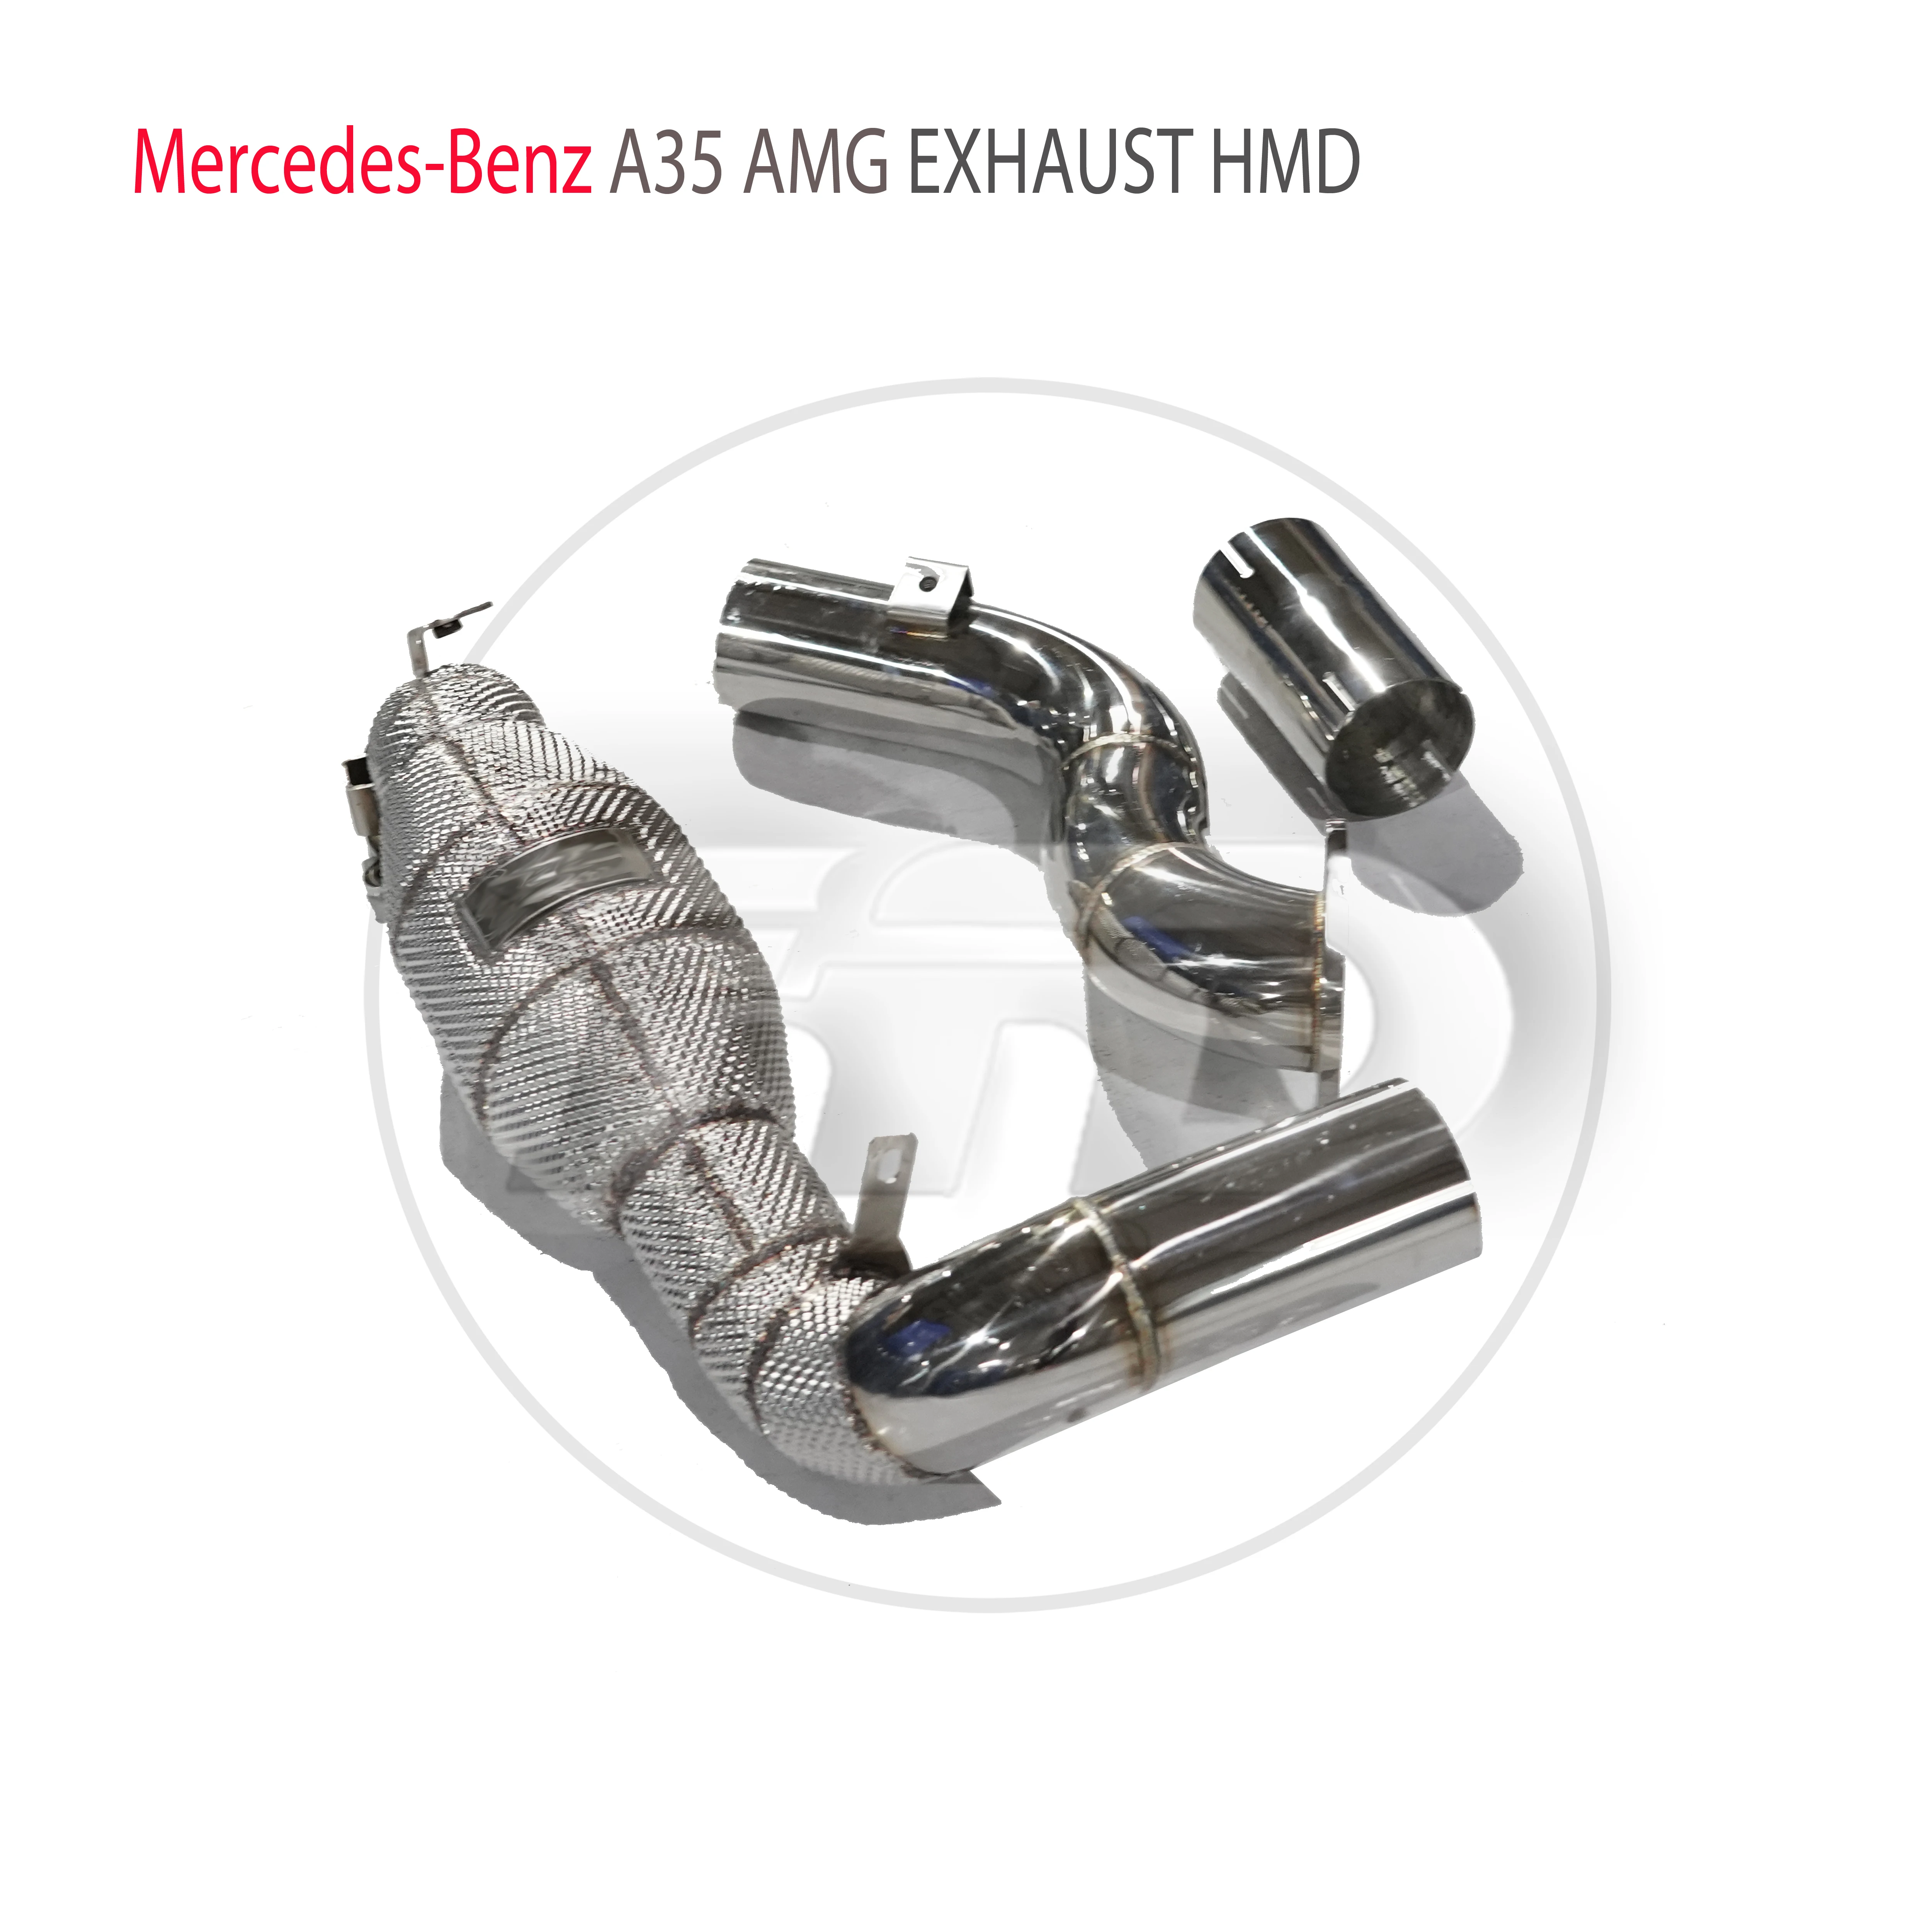 

HMD Exhaust System High Flow Performance Downpipe for Mercedes Benz A35 CLA35 GLA35 AMG W177 With Catalytic Header